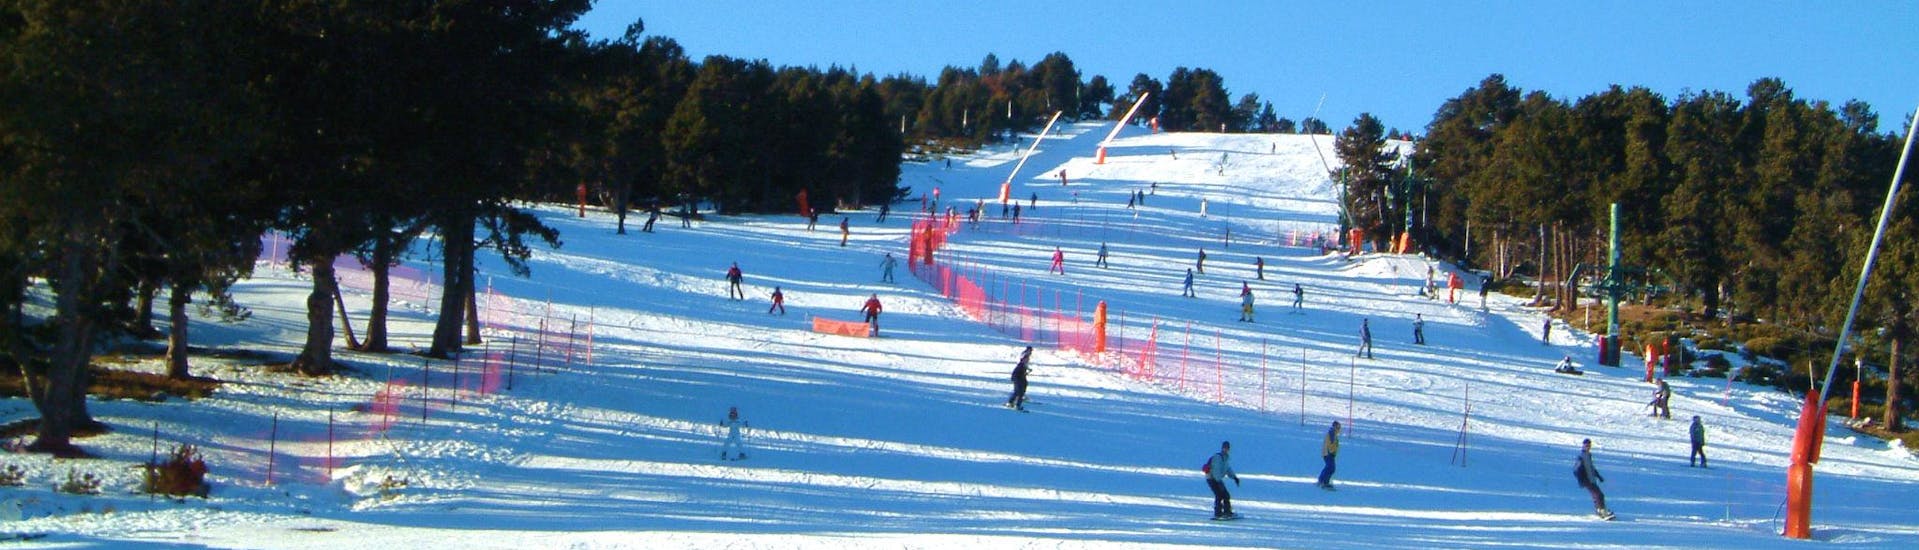 Skiers are skiing down one of the snowy slopes of the French ski resort Font Romeu in the Pyrenees.